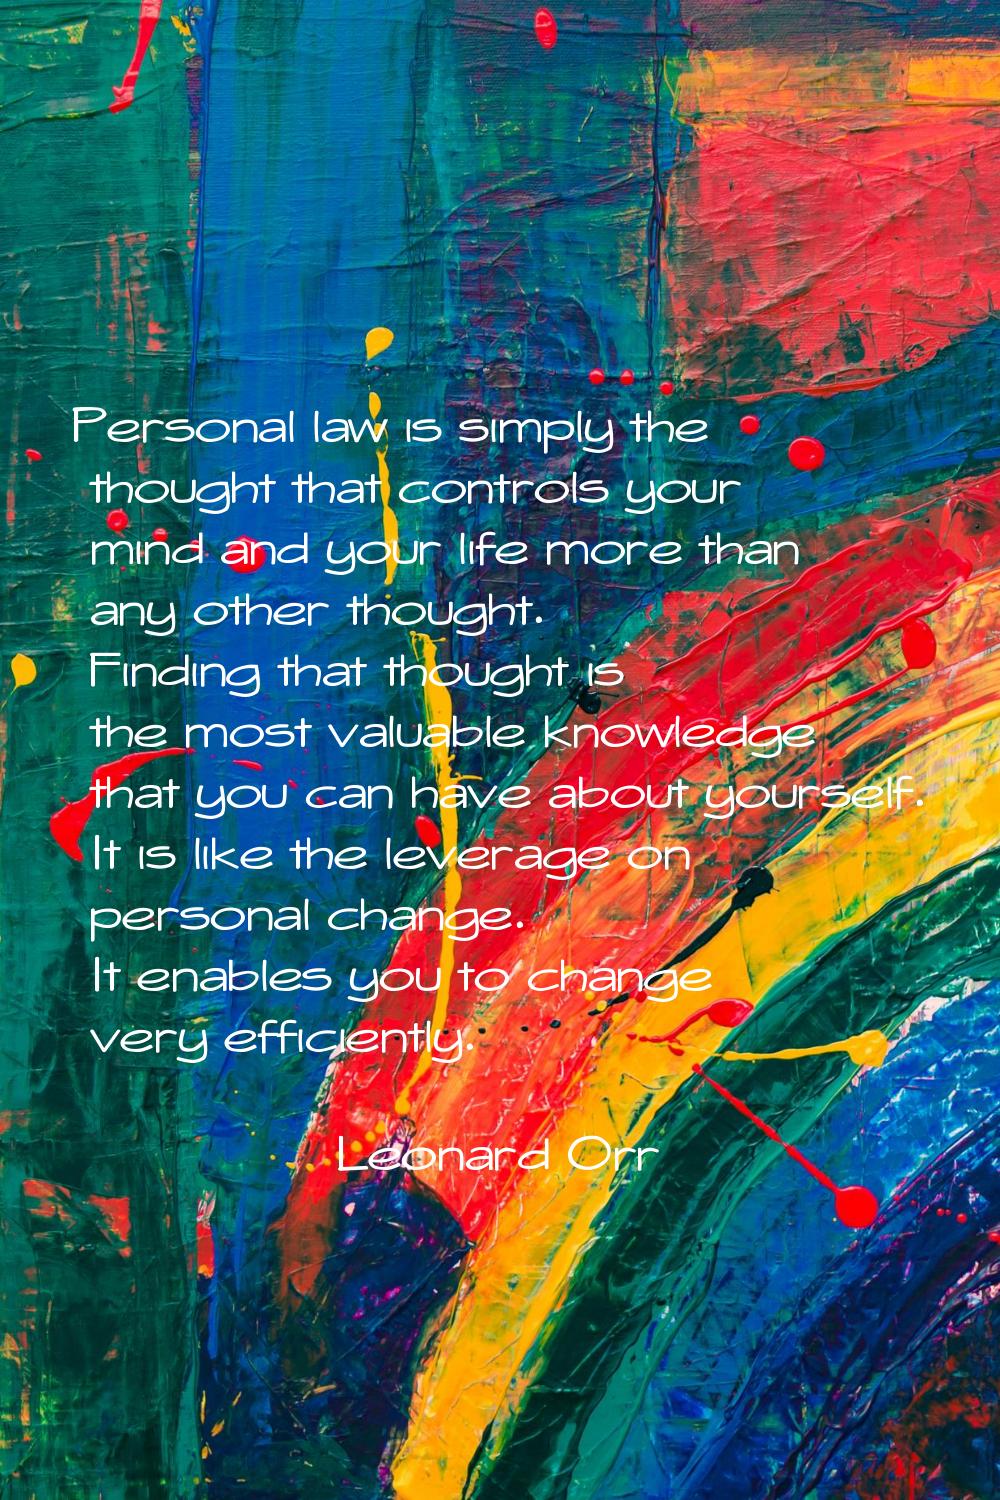 Personal law is simply the thought that controls your mind and your life more than any other though